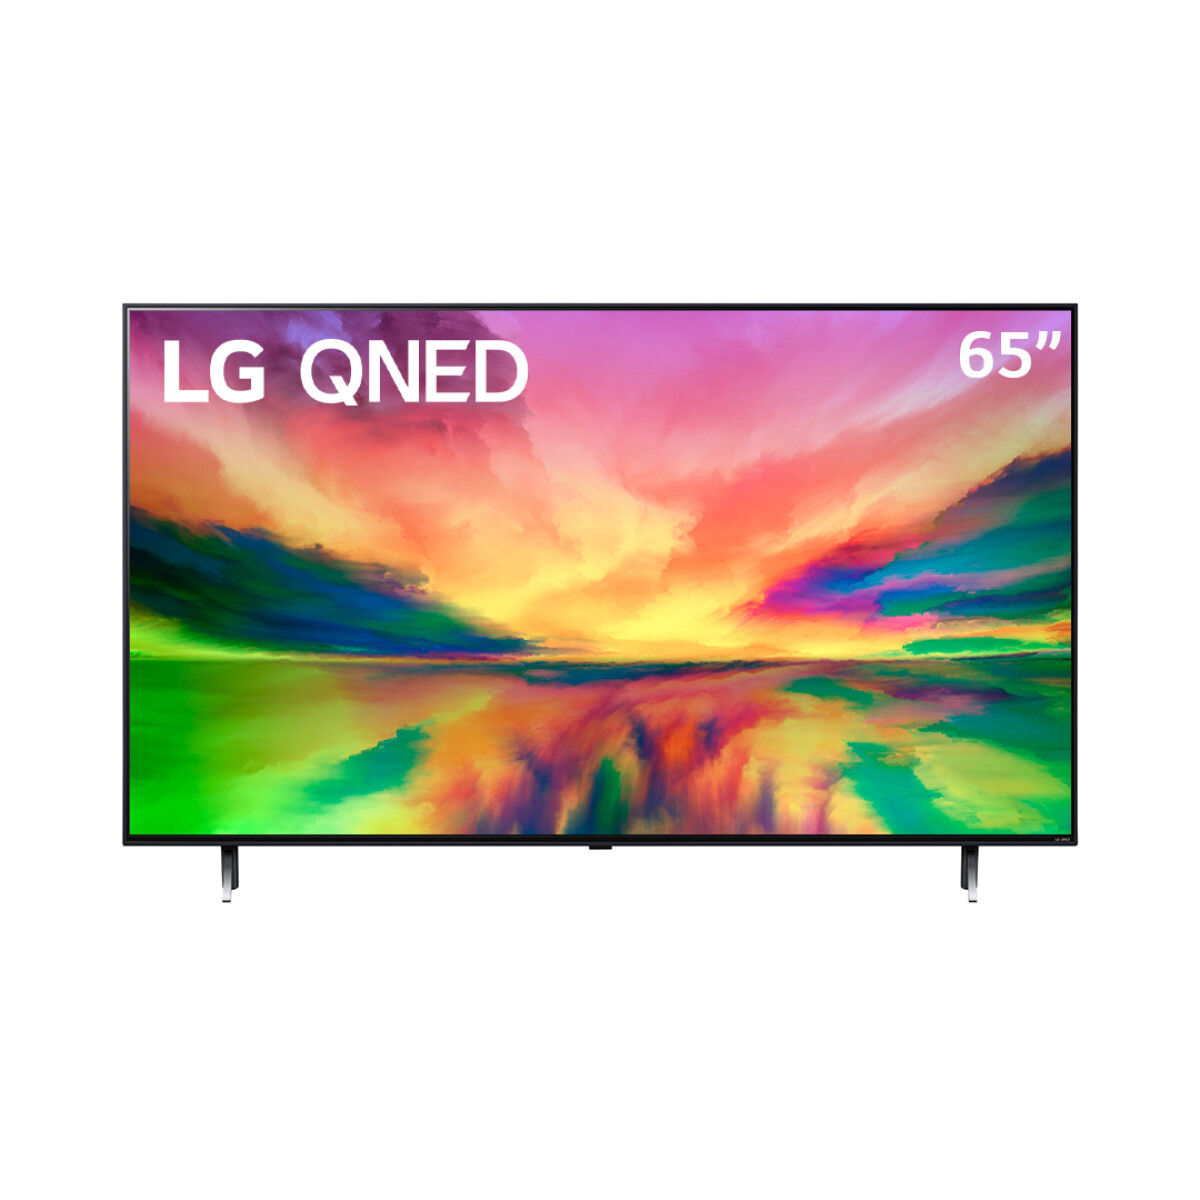 LG QNED 4K 65" 65QNED80 